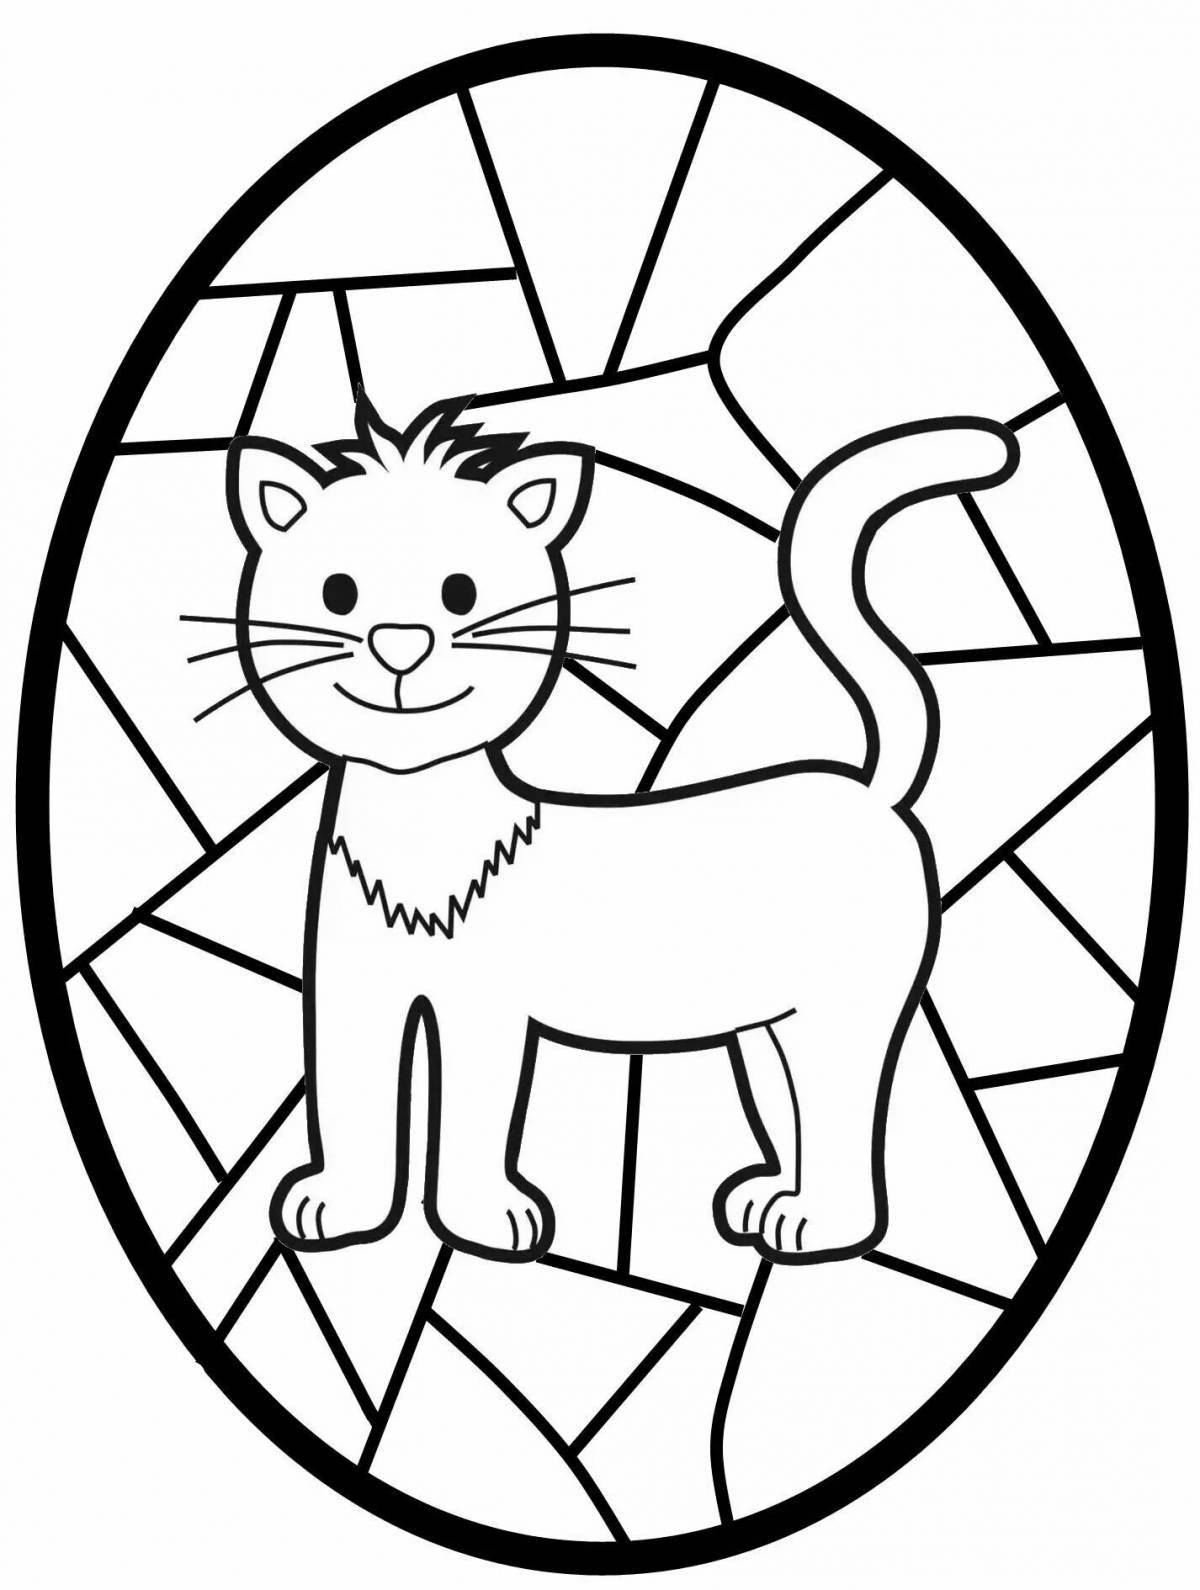 Great stained glass coloring book